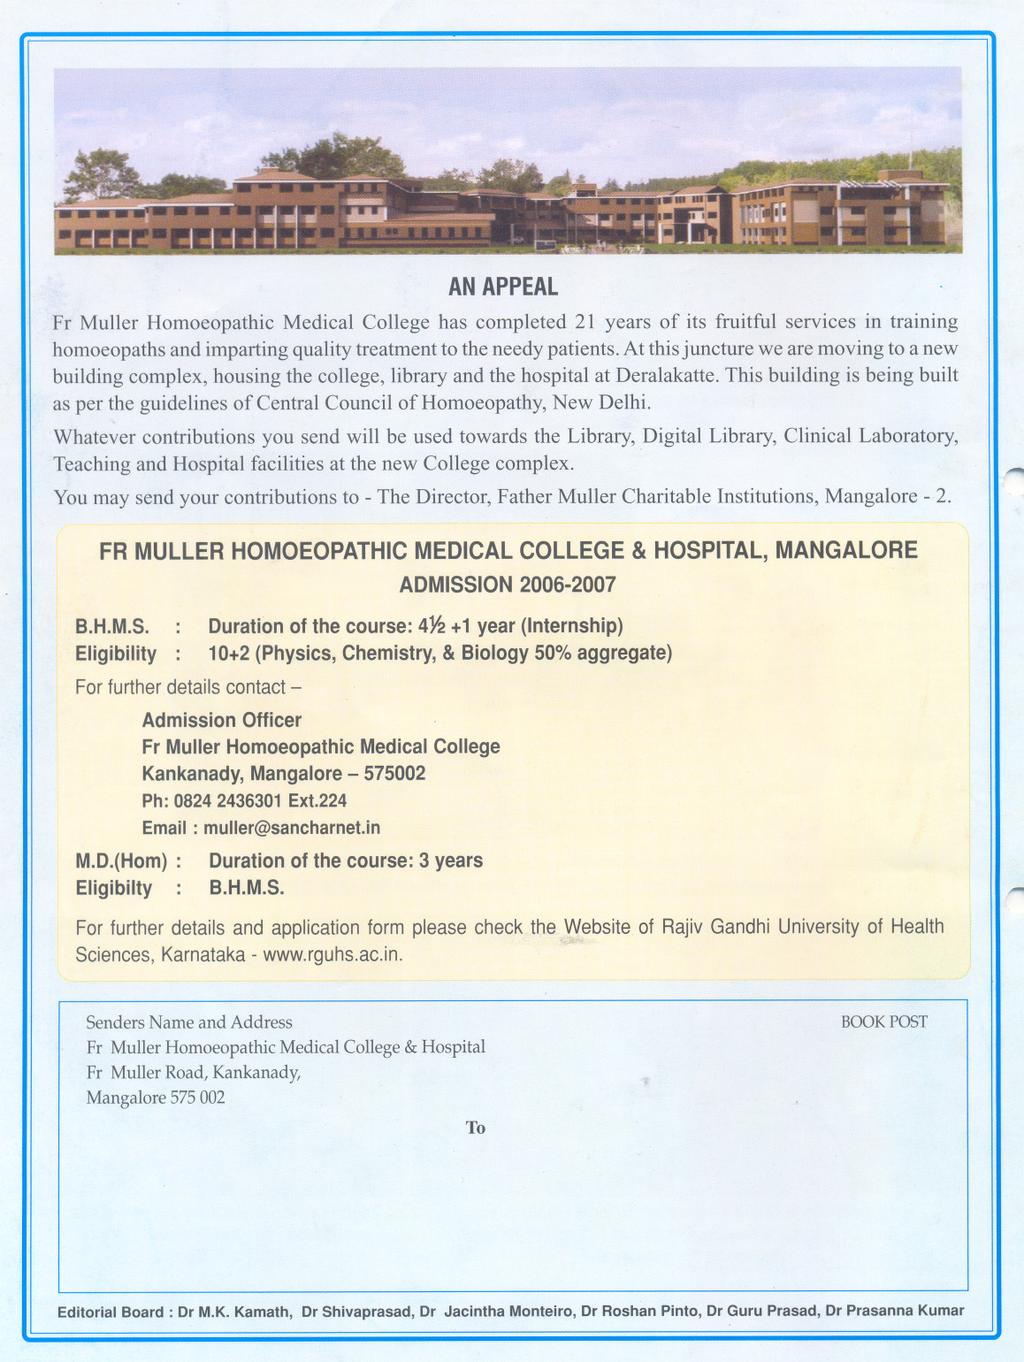 ANAPPEAL Fr Muller Homoeopathic Medical College has completed 21 years of its fruitful services in training homoeopaths and imparting quality treatment to the needy patients.